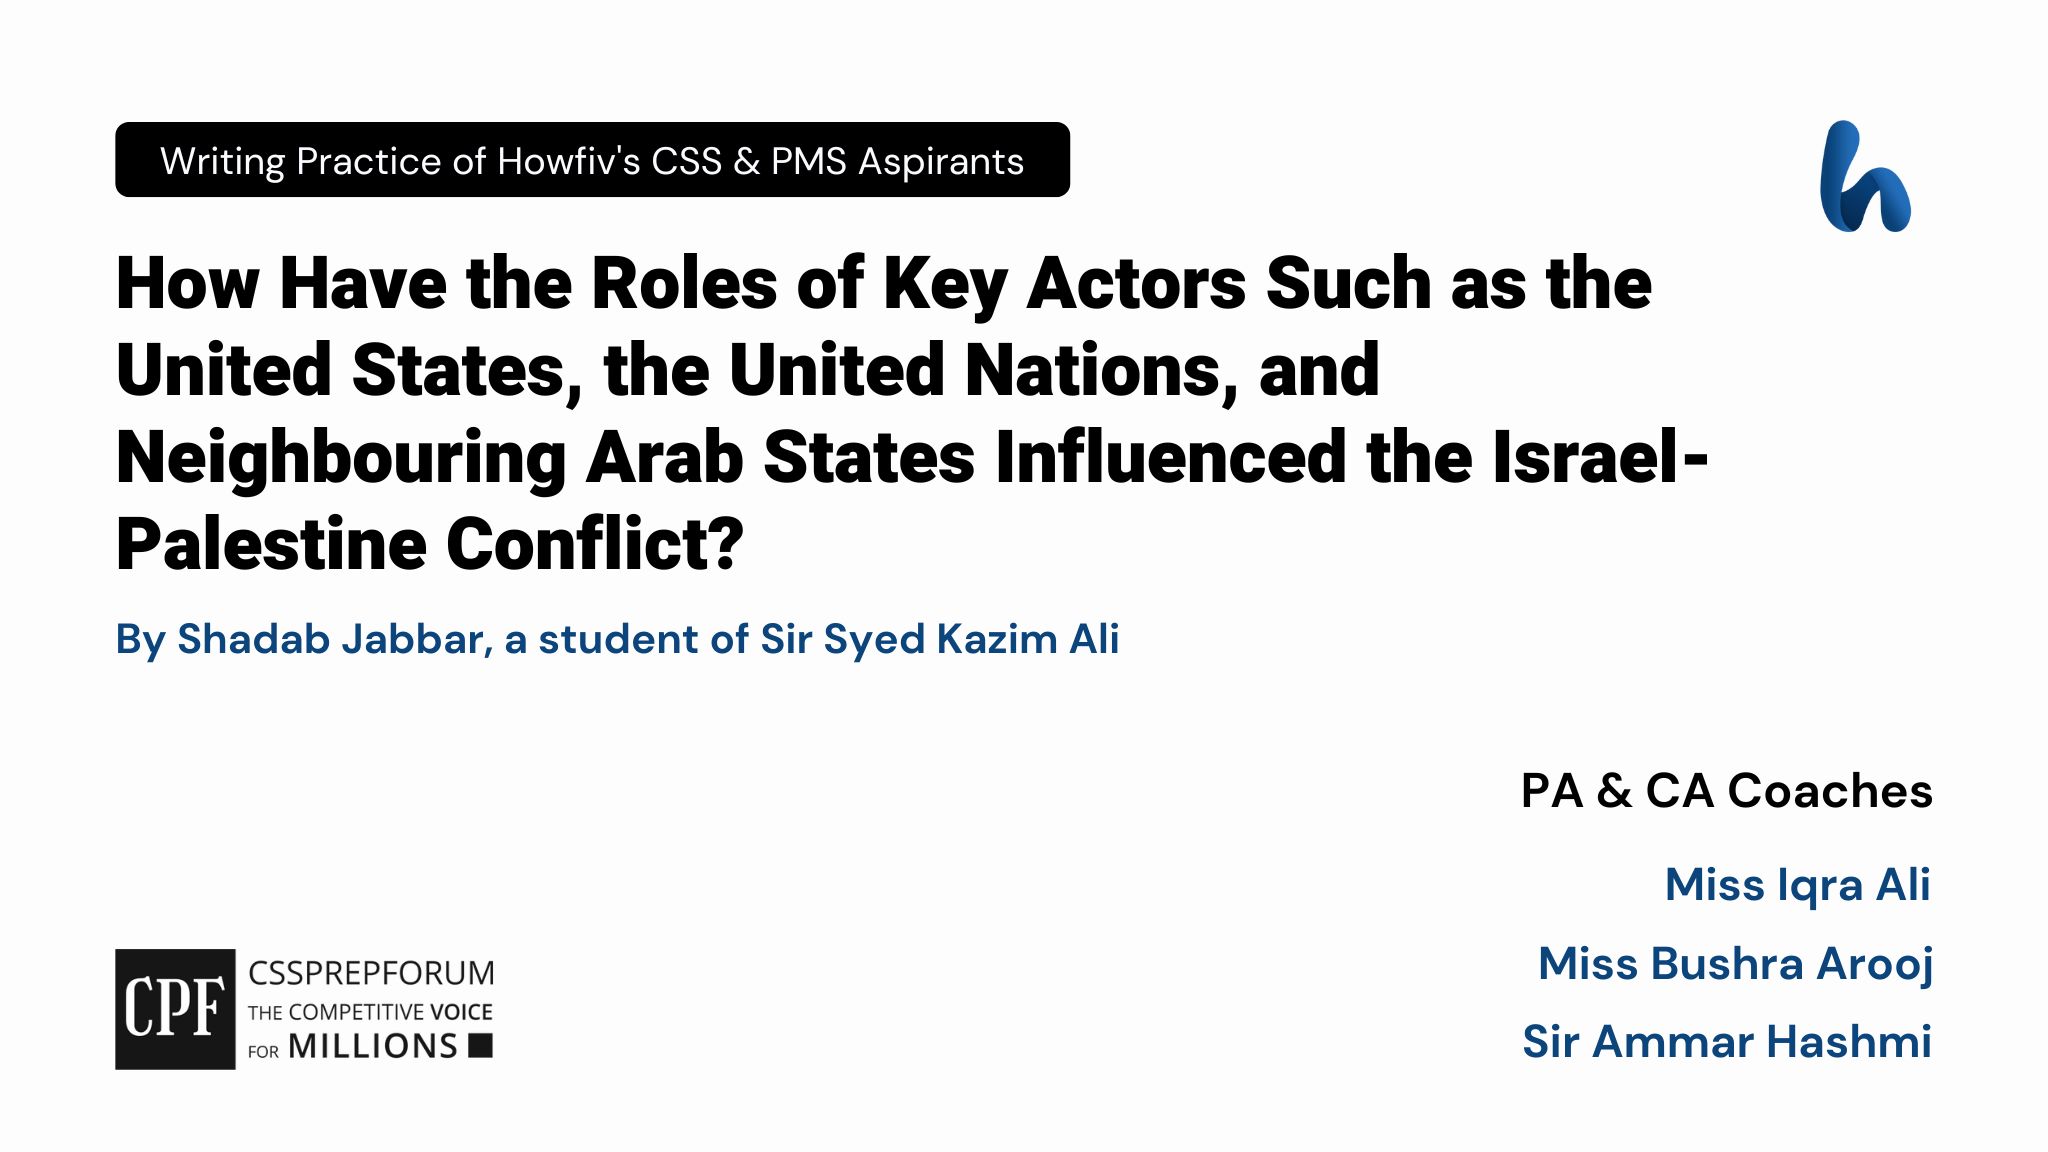 International Key Actors and the Israel-Palestine Conflict by Shadab Jabbar